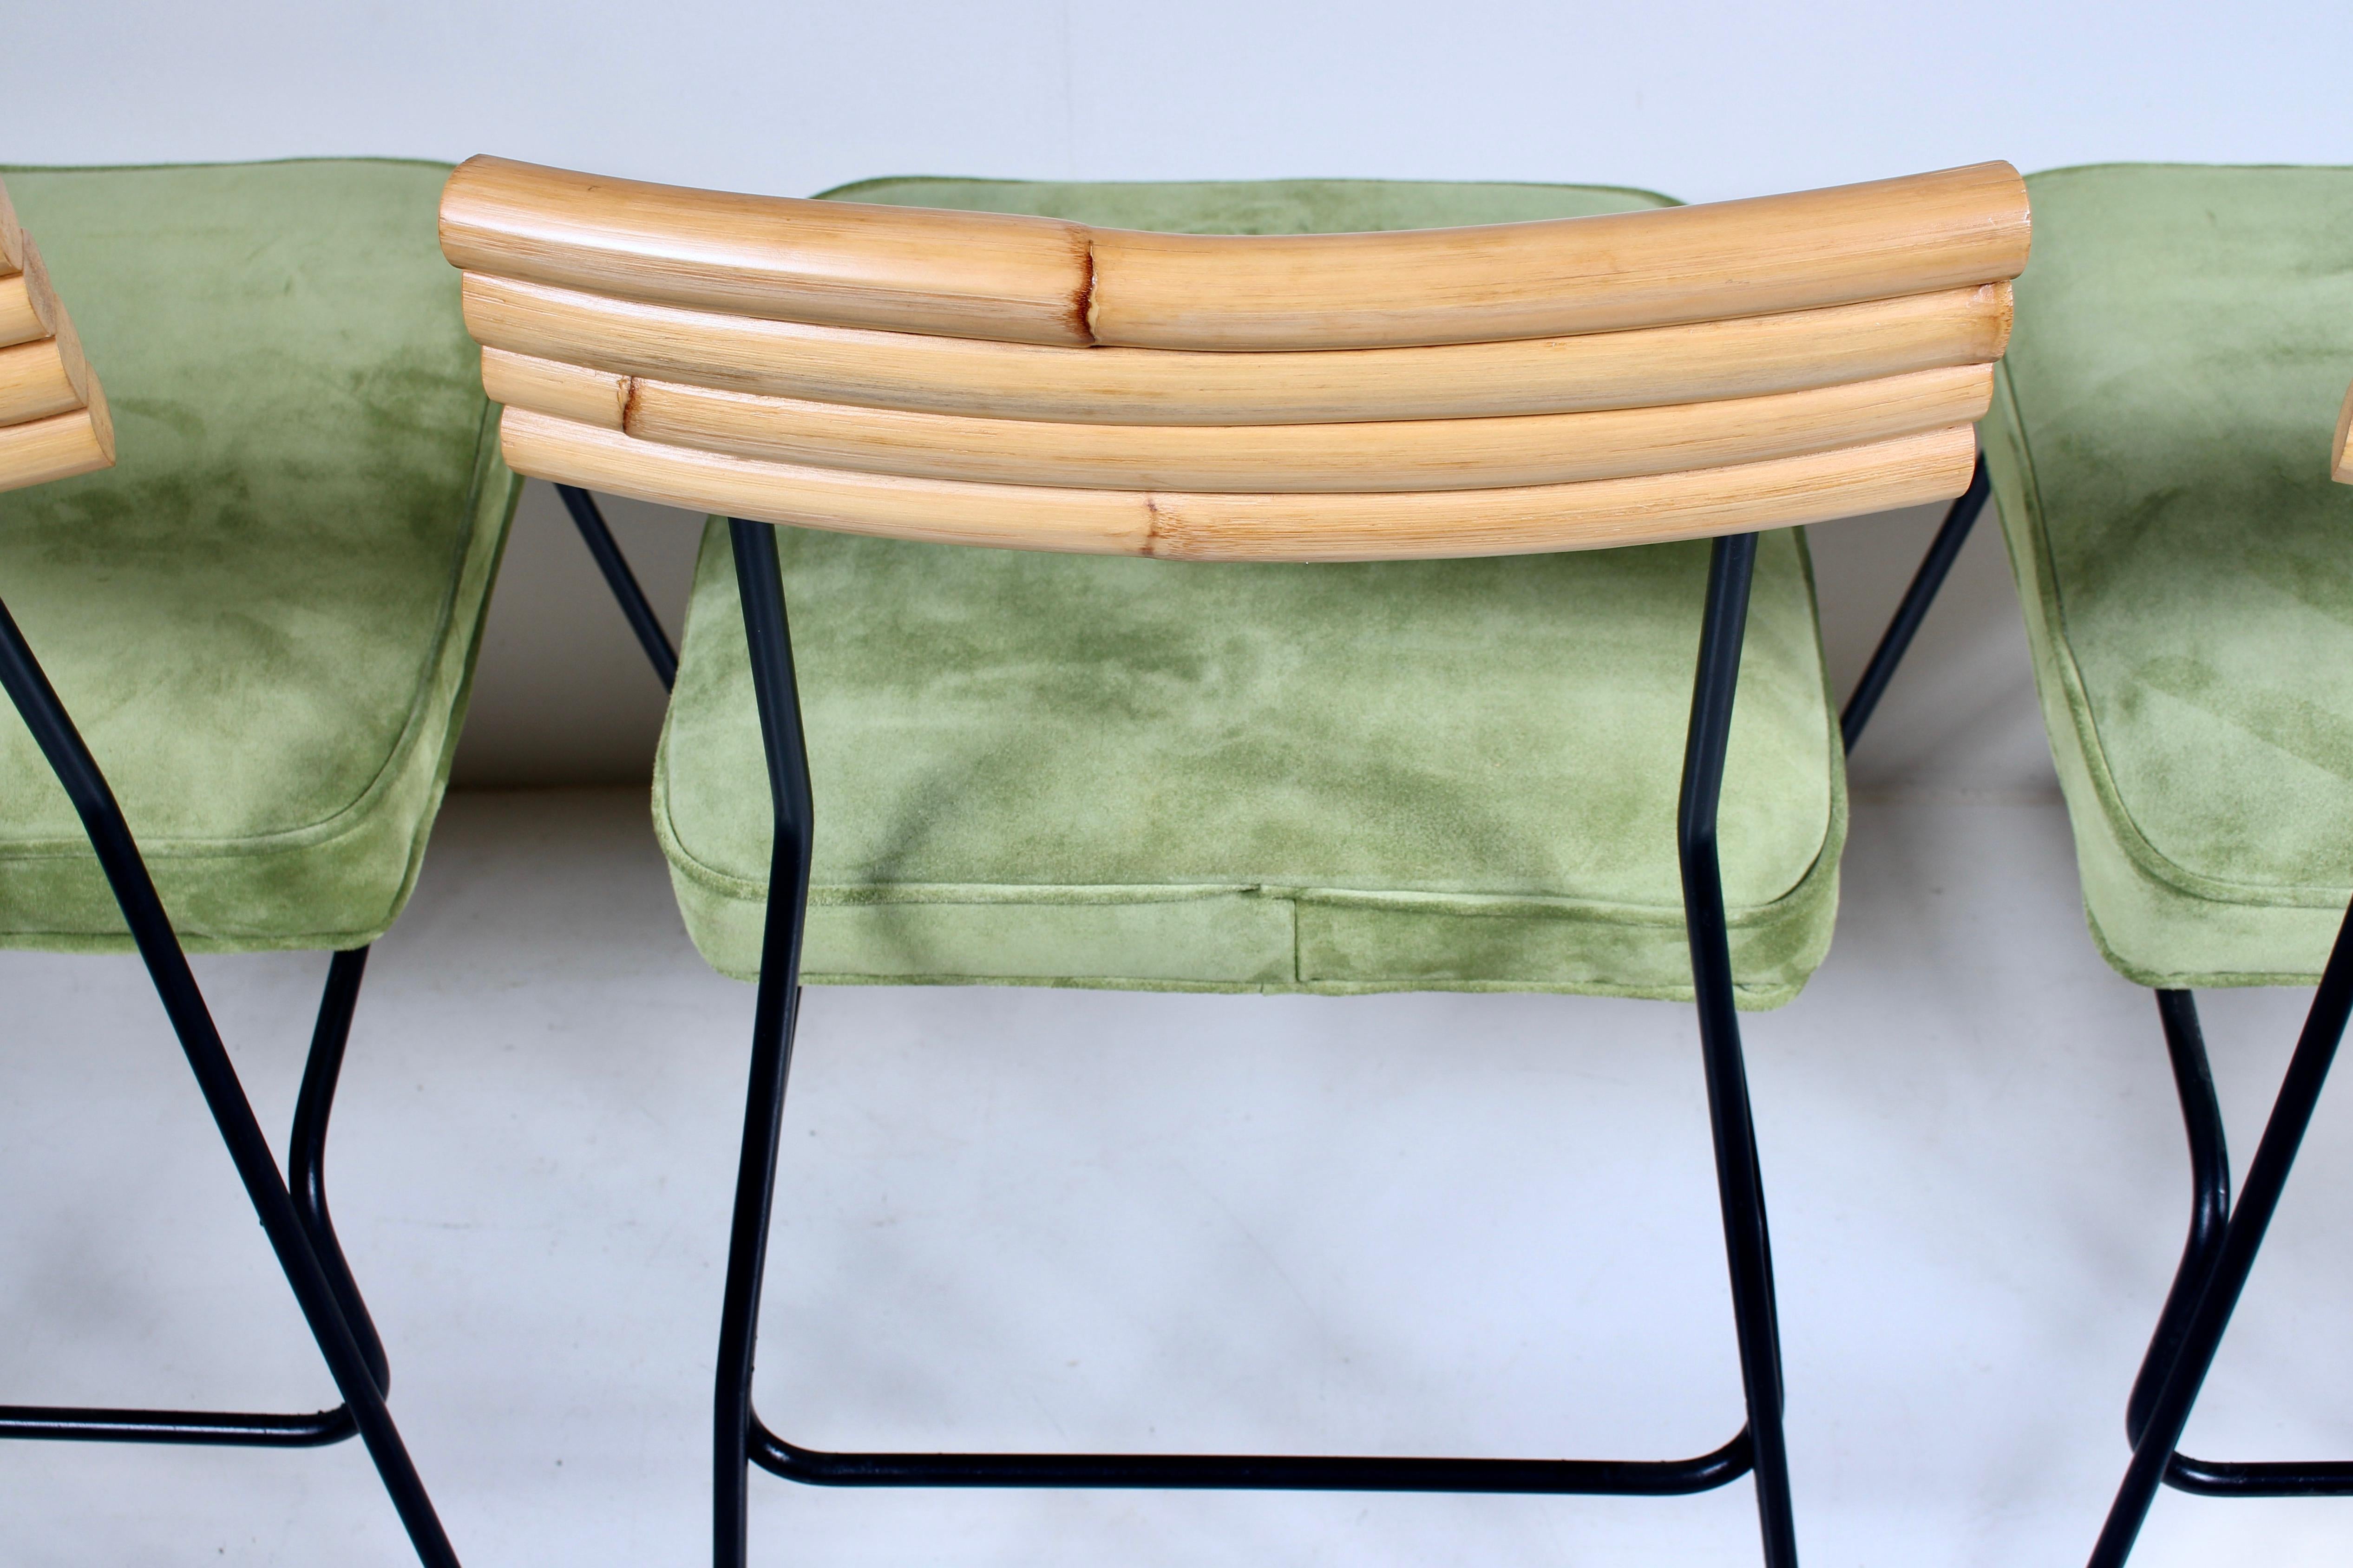 Set of 4 Herb & Shirley Ritts Iron, Bamboo & Suede Dining Side Chairs, 1950s For Sale 5